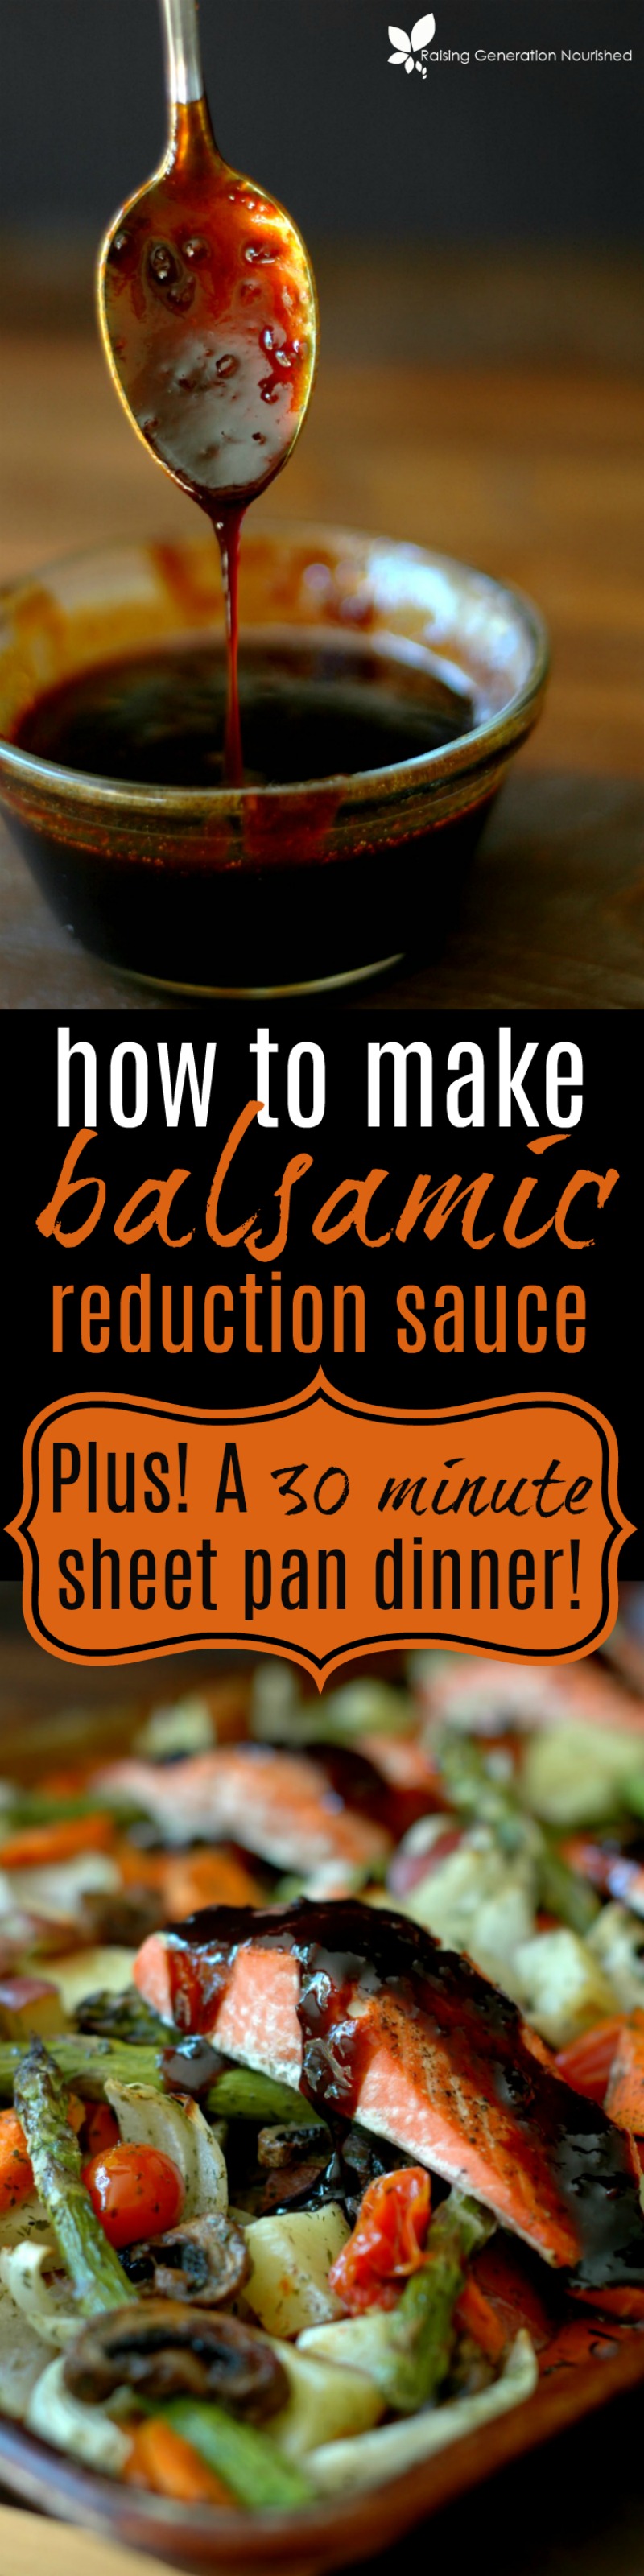 How To Make Balsamic Reduction Sauce :: Plus! A 30 Minute Sheet Pan Dinner!